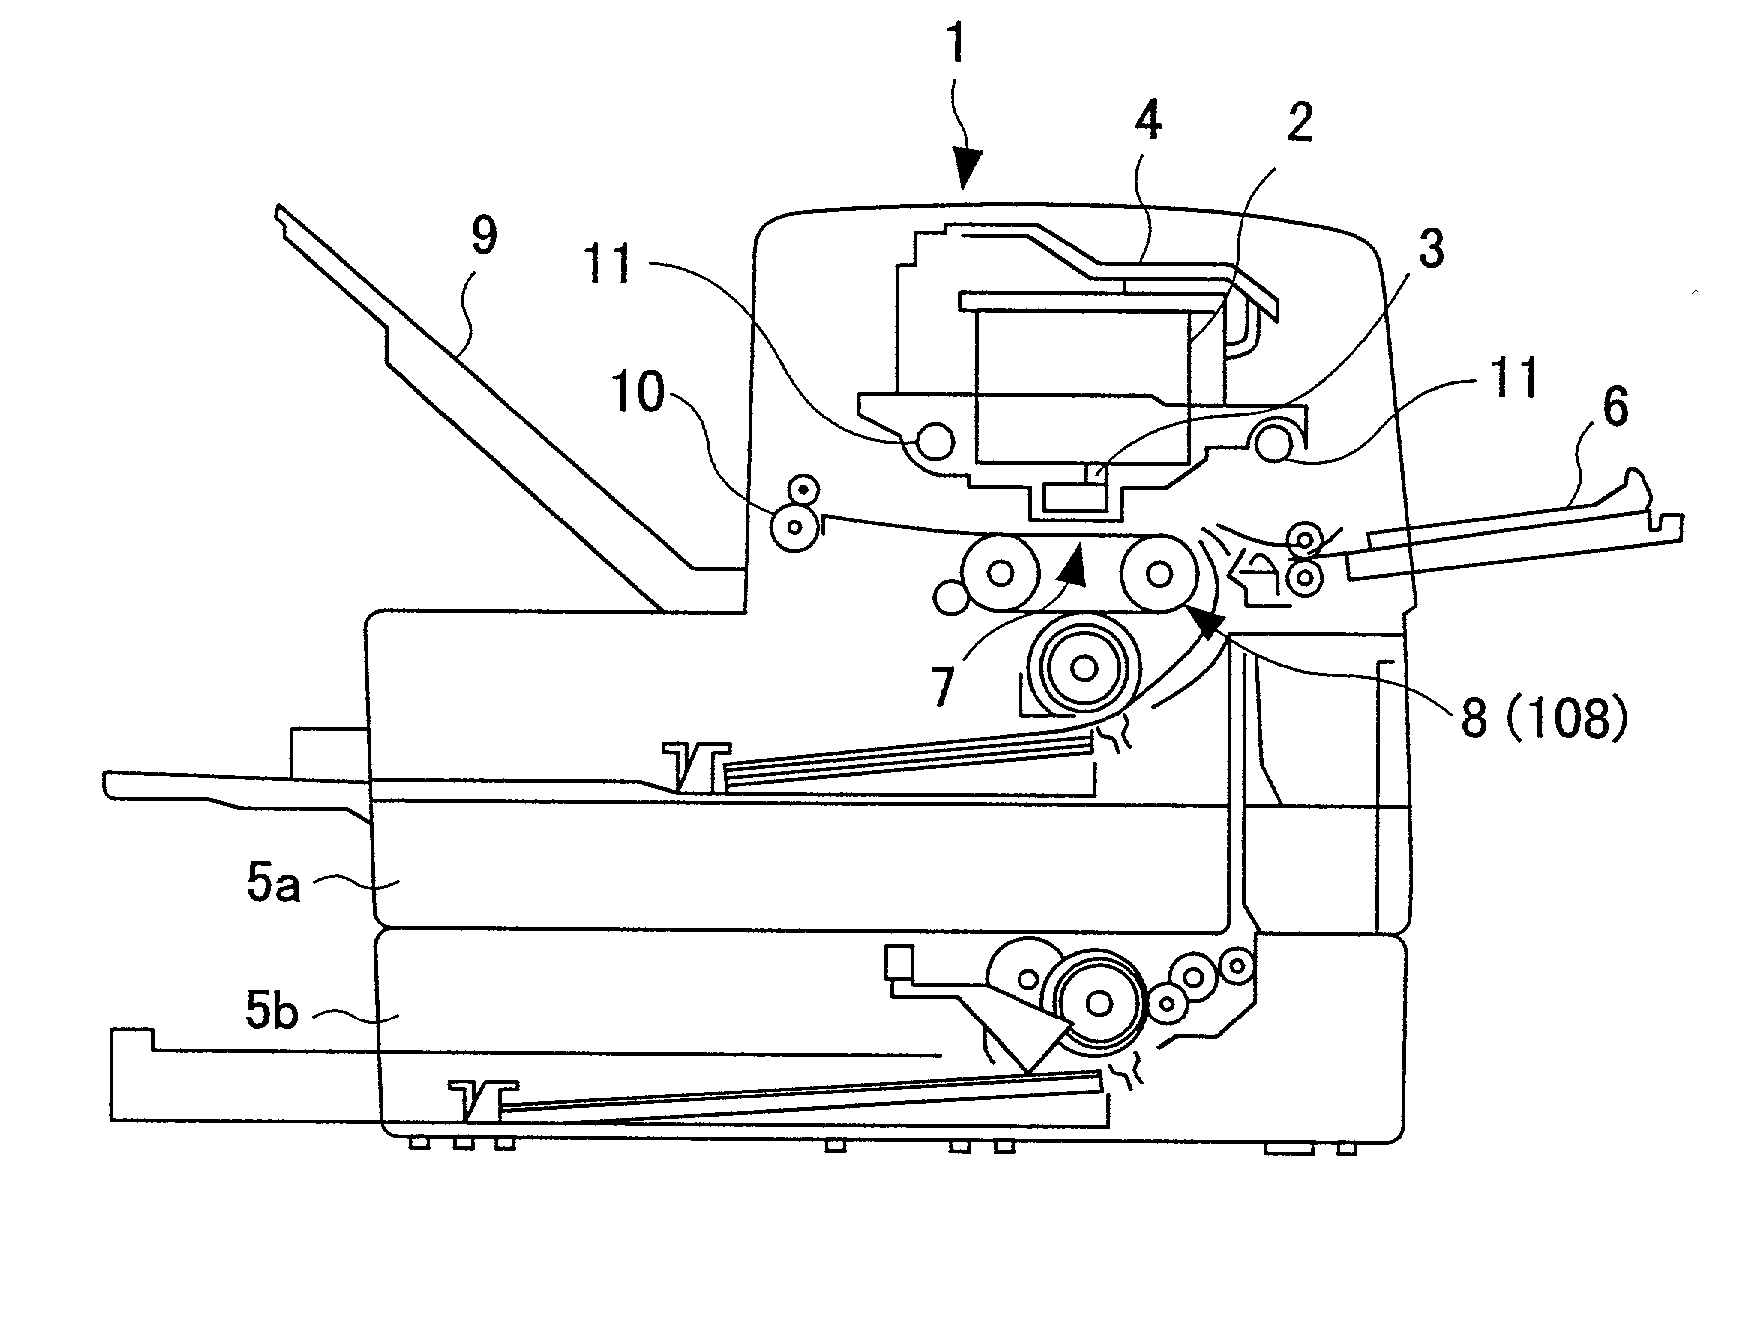 Recording-medium conveying device conveying a recording medium on a conveying belt charged with a positive charge and a negative charge alternately